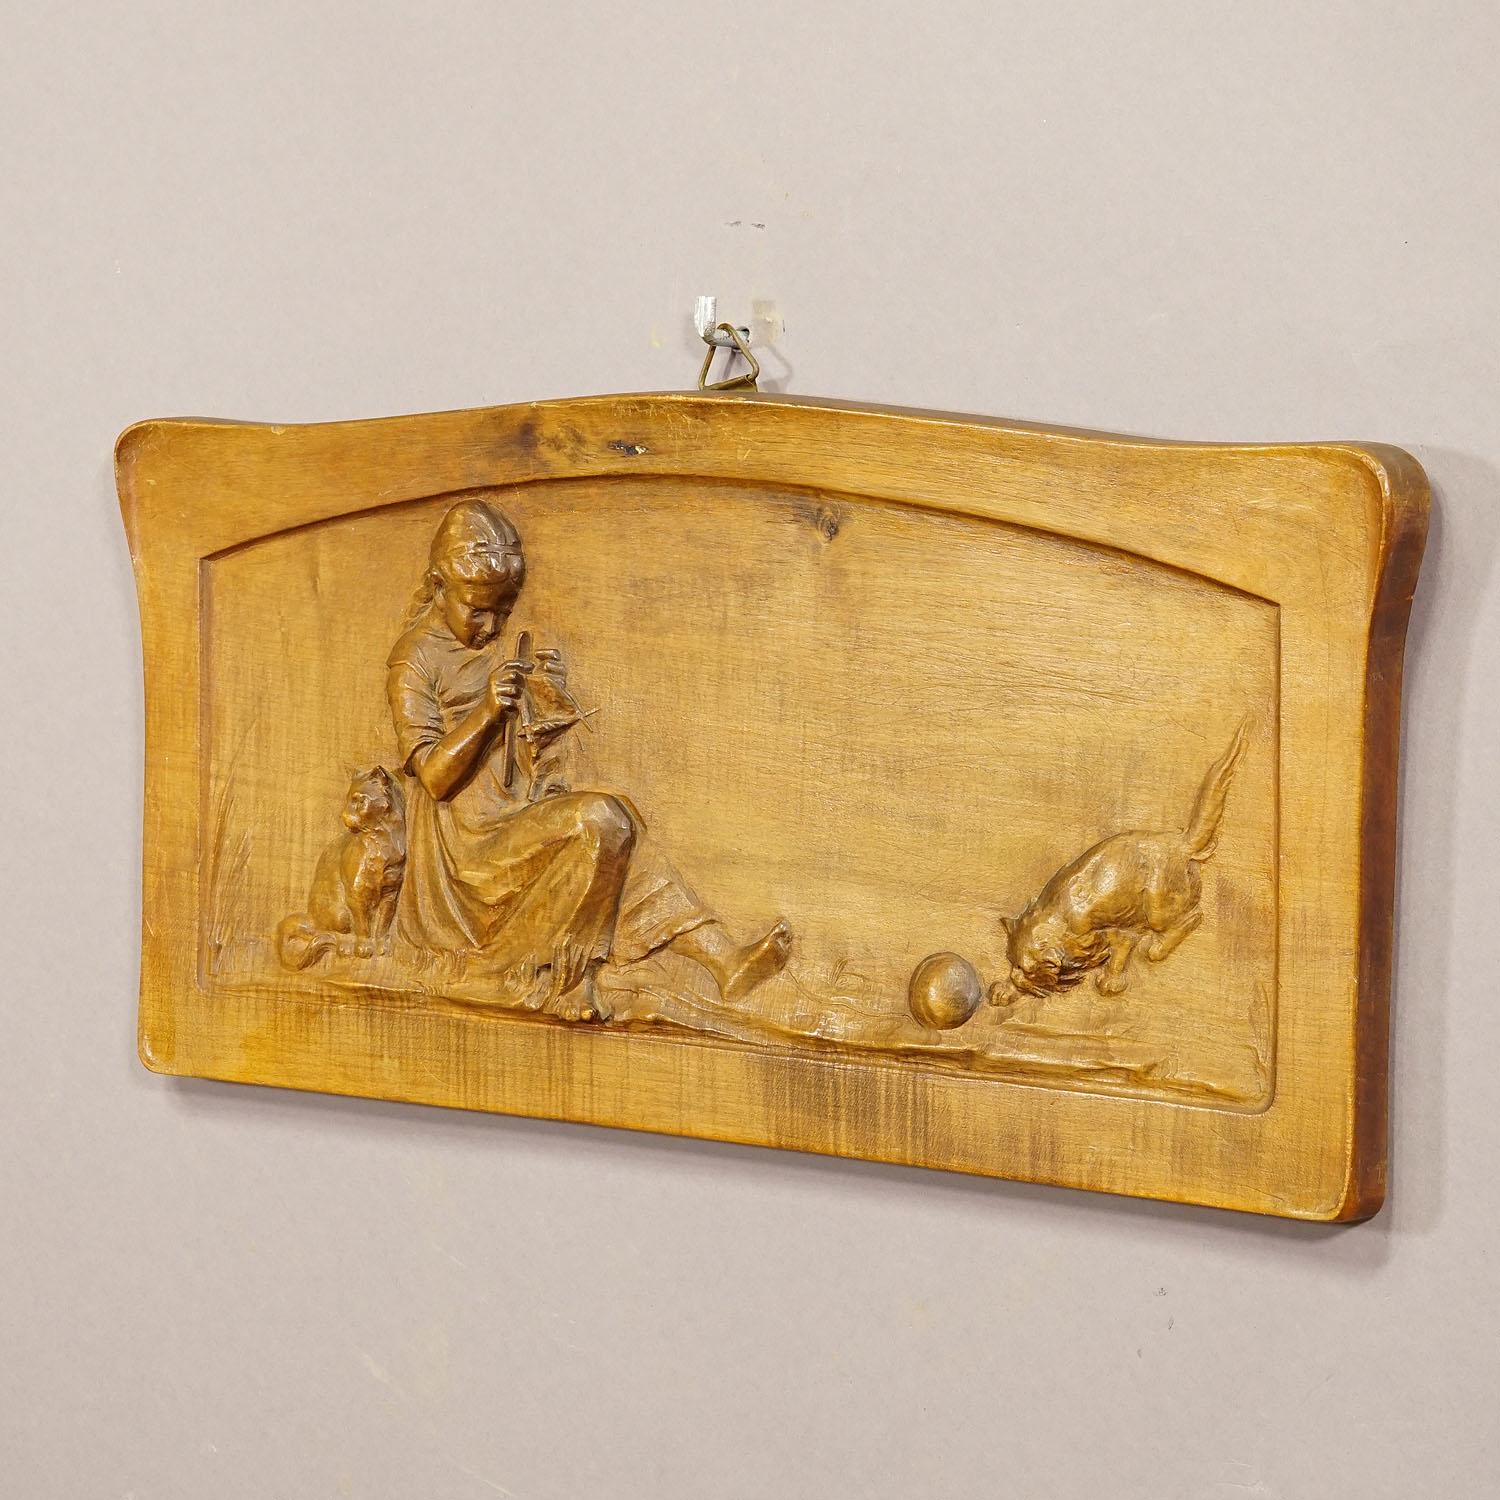 Black Forest Wall Relief Wood Carving with Farmer Girl and Kitten, circa 1900